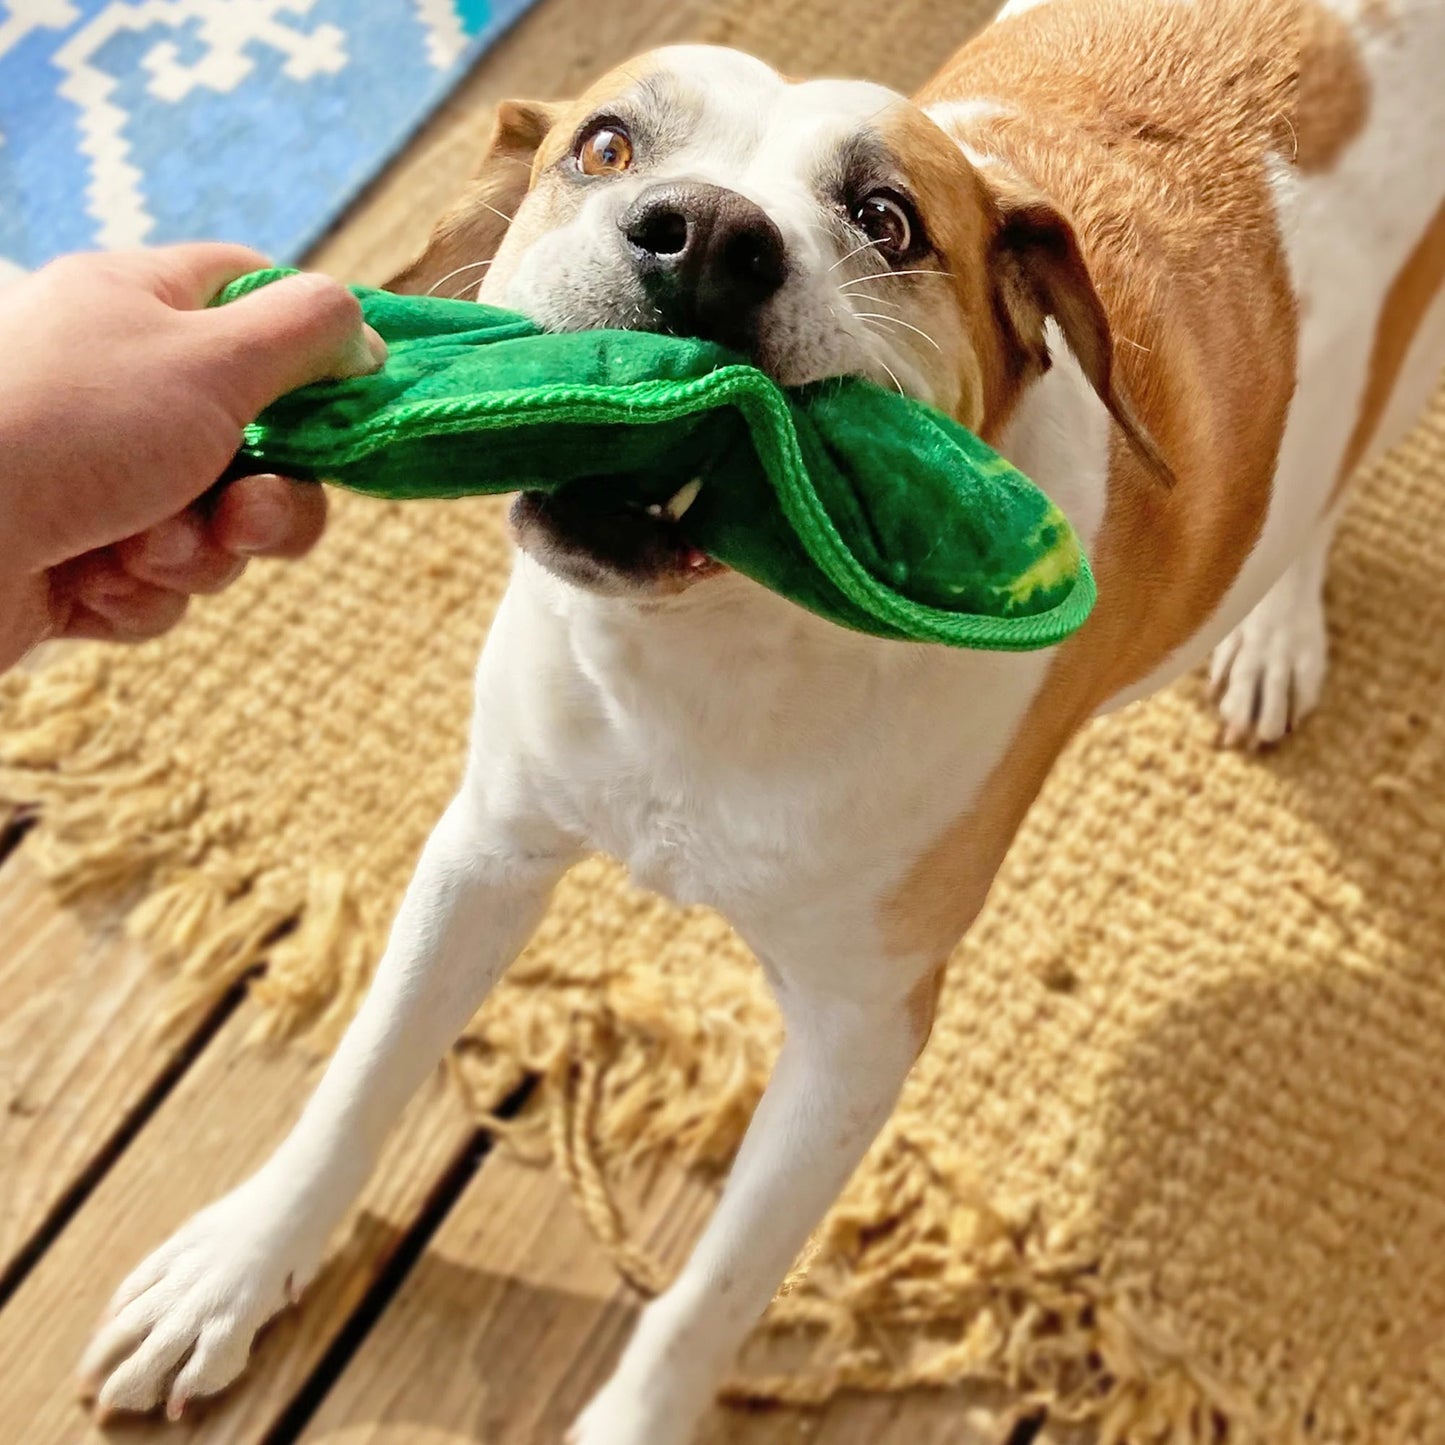 Tuffer Chewer Refillable Dill Pickle Toy - Wiggles & Whiskers Pet SuppliesKane Pet Supplies